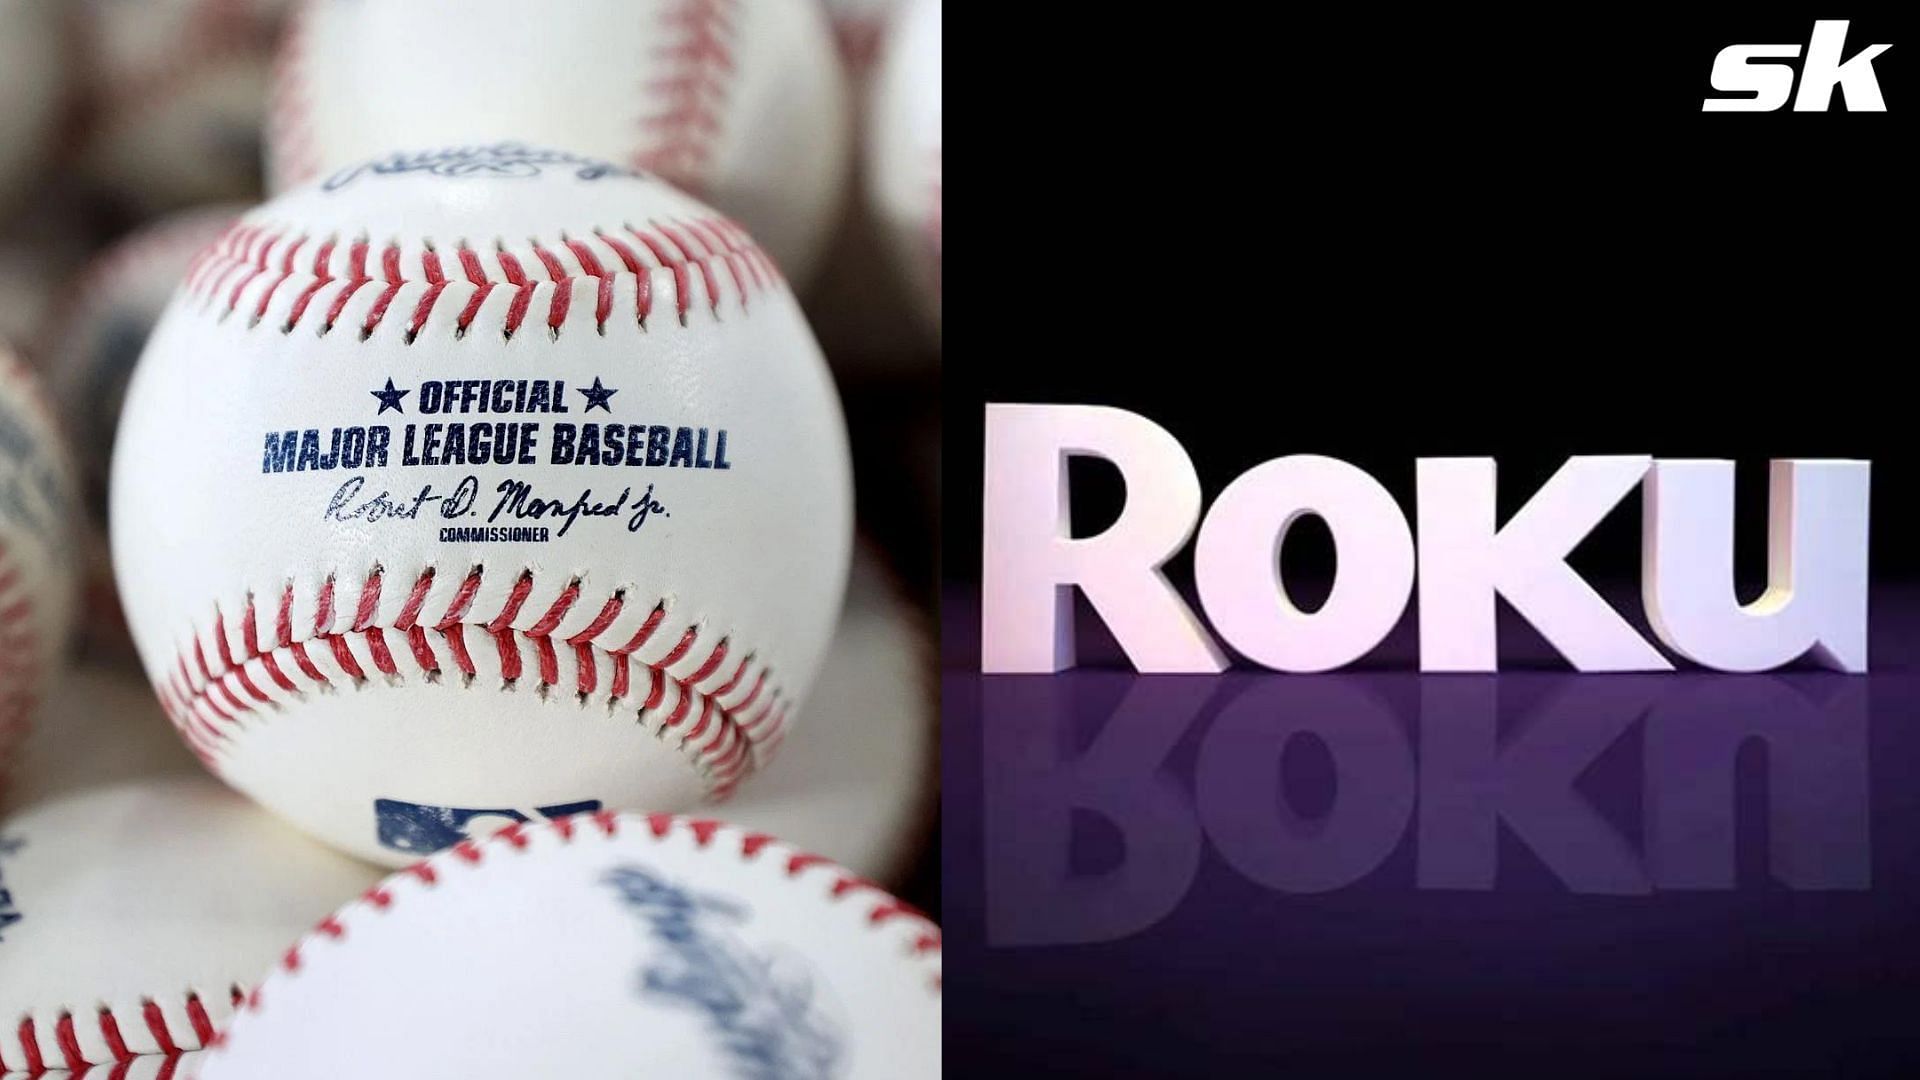 The MLB and Roku have reached an exclusive deal to broadcast Sunday games on the streaming service